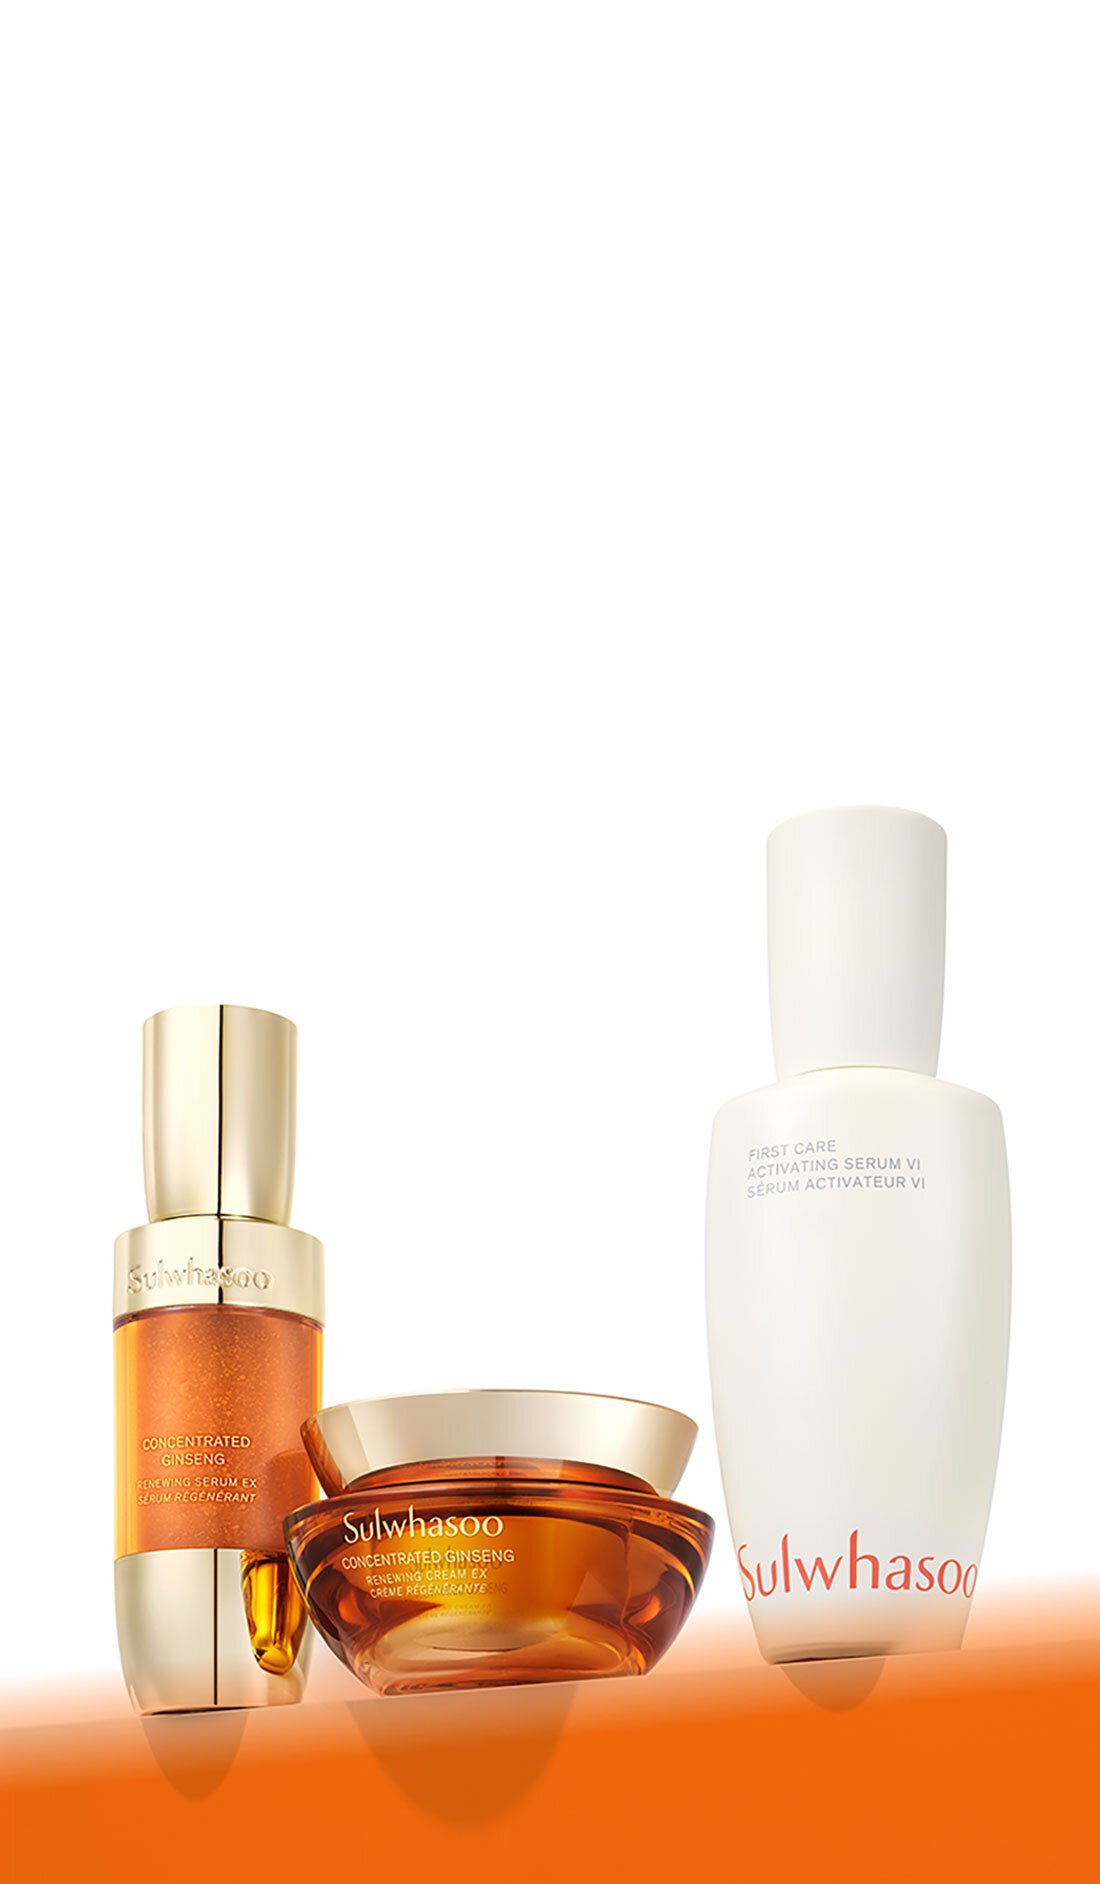 First Care Activating Serum, Concentrated Ginseng Renewing Cream & Serum